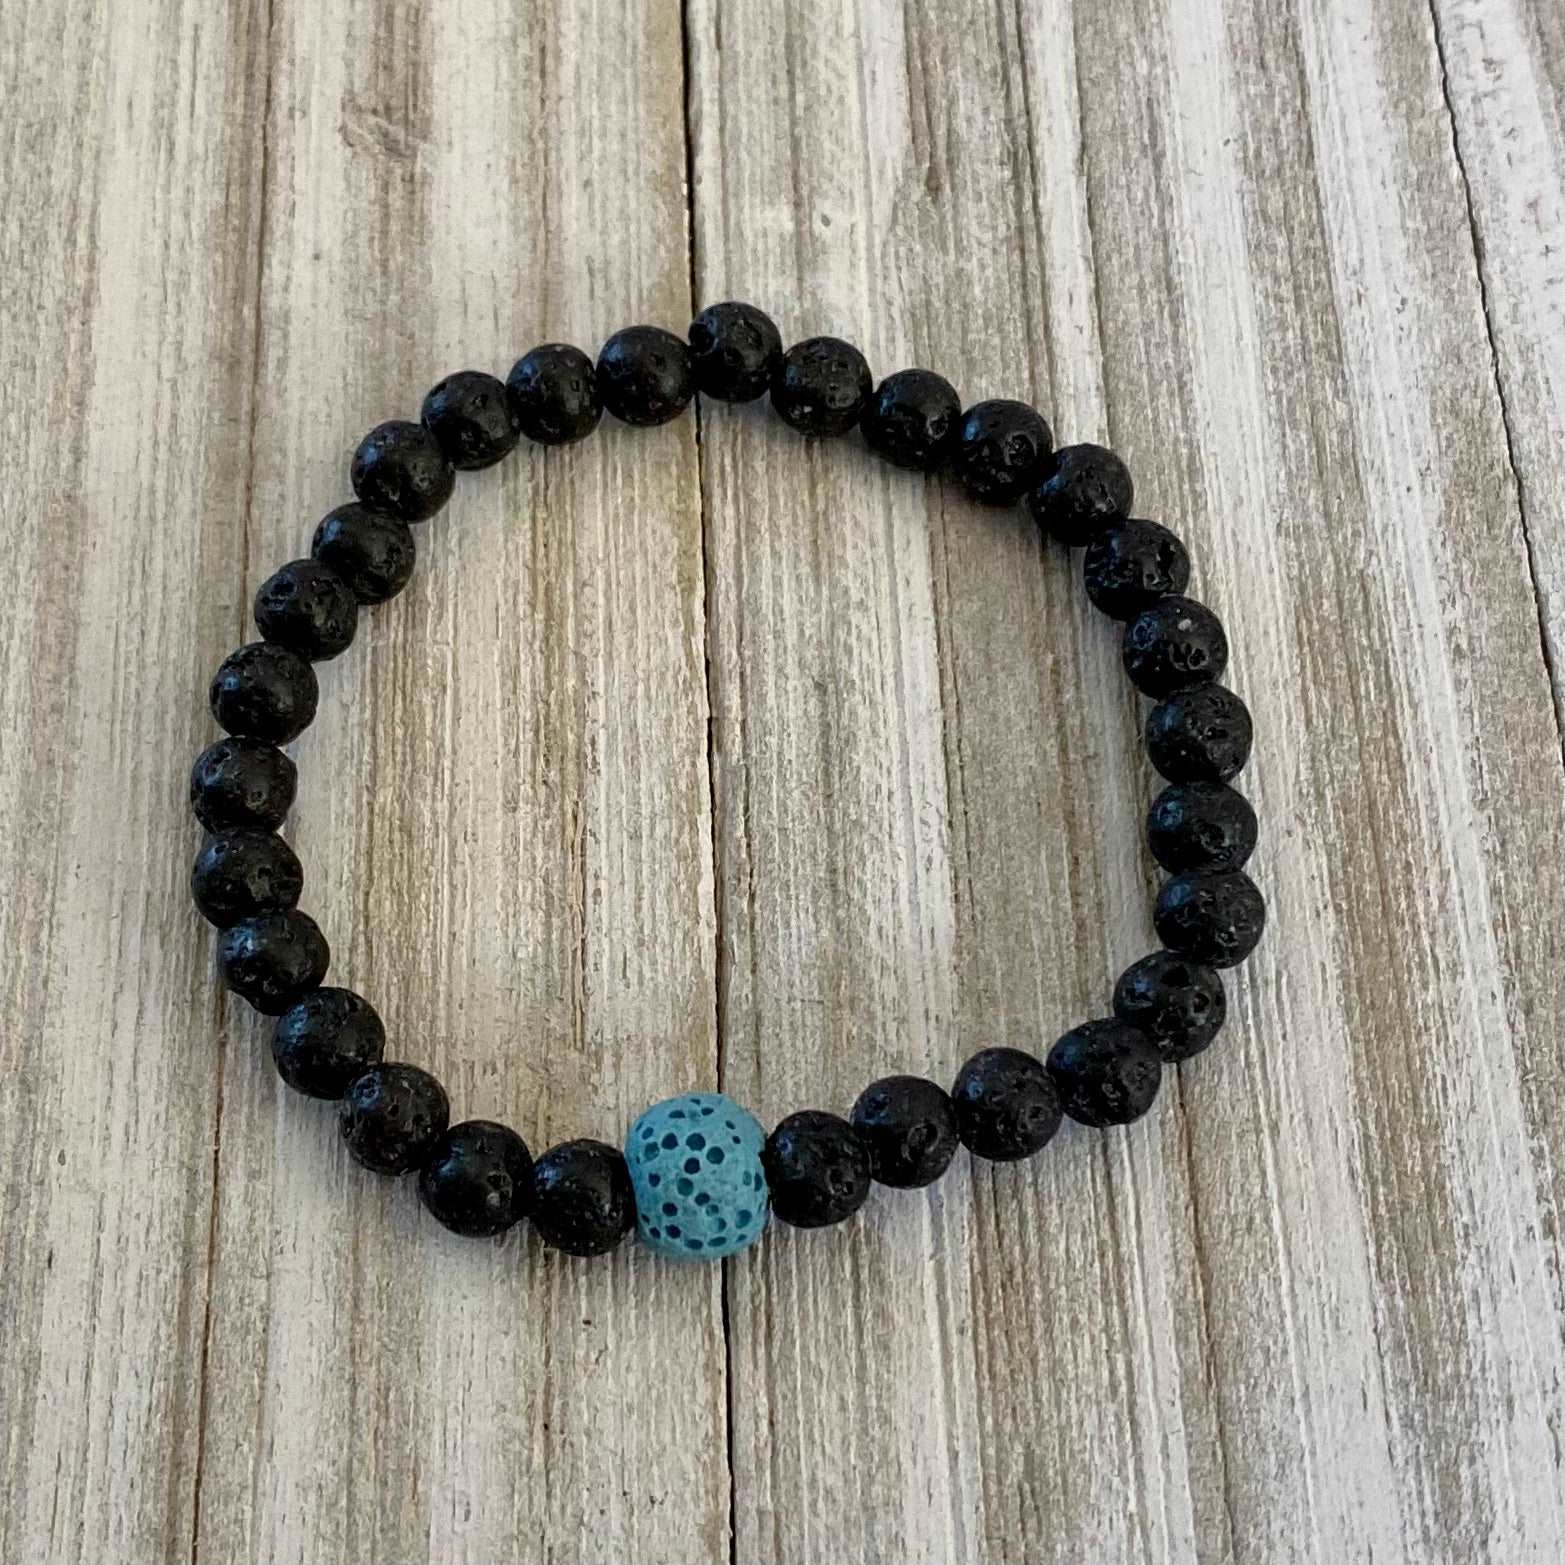 Lava Rock 8mm Healing Bracelet with Elephant Charms  Earth And Soul